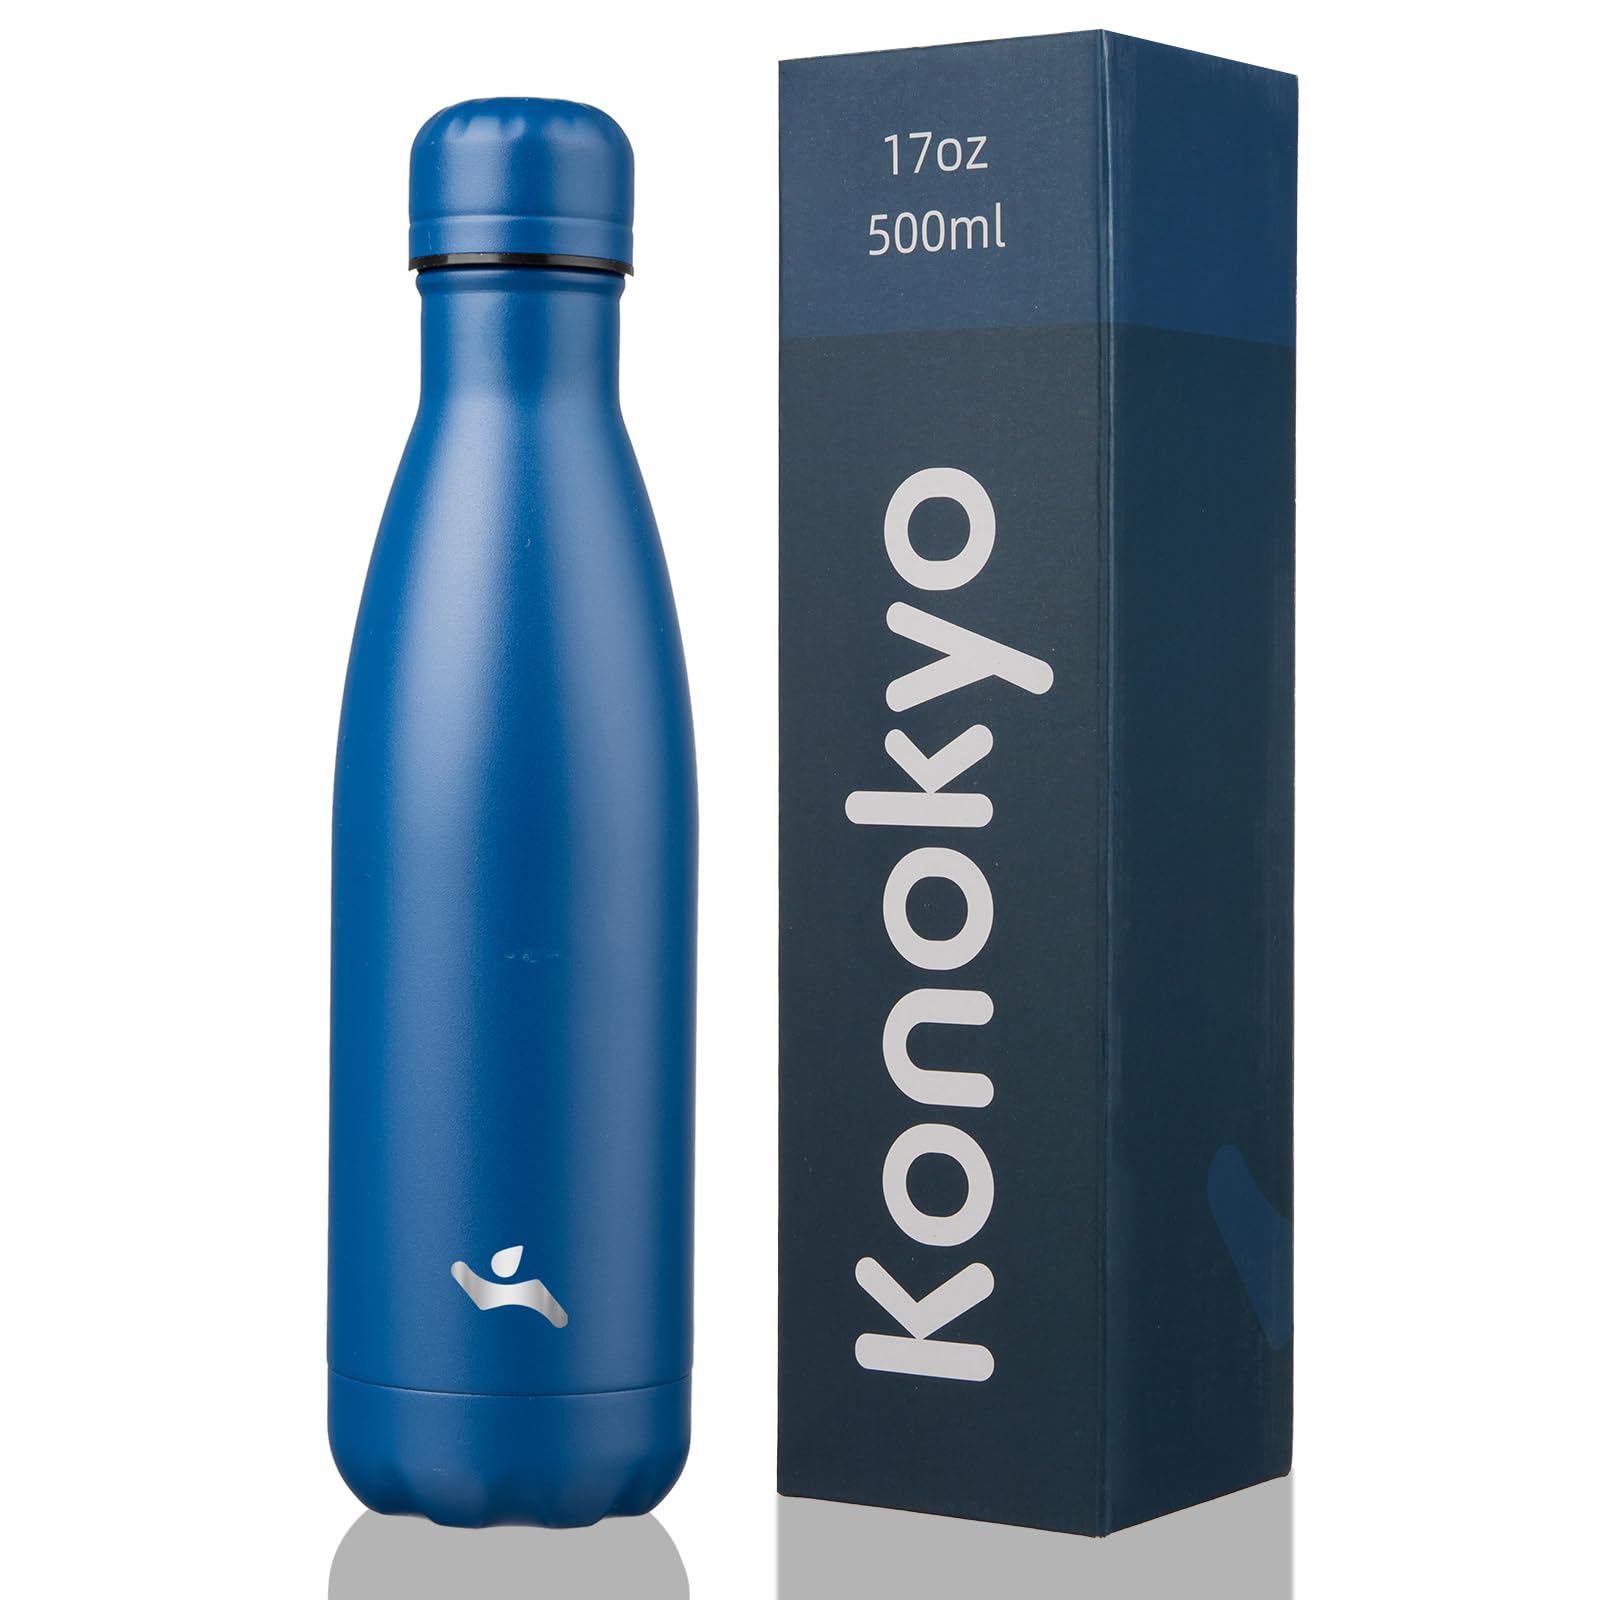 Konokyo Insulated Water Bottles,17oz Double Wall Stainless Steel Vacumm Metal Flask for Sports Travel,Blue